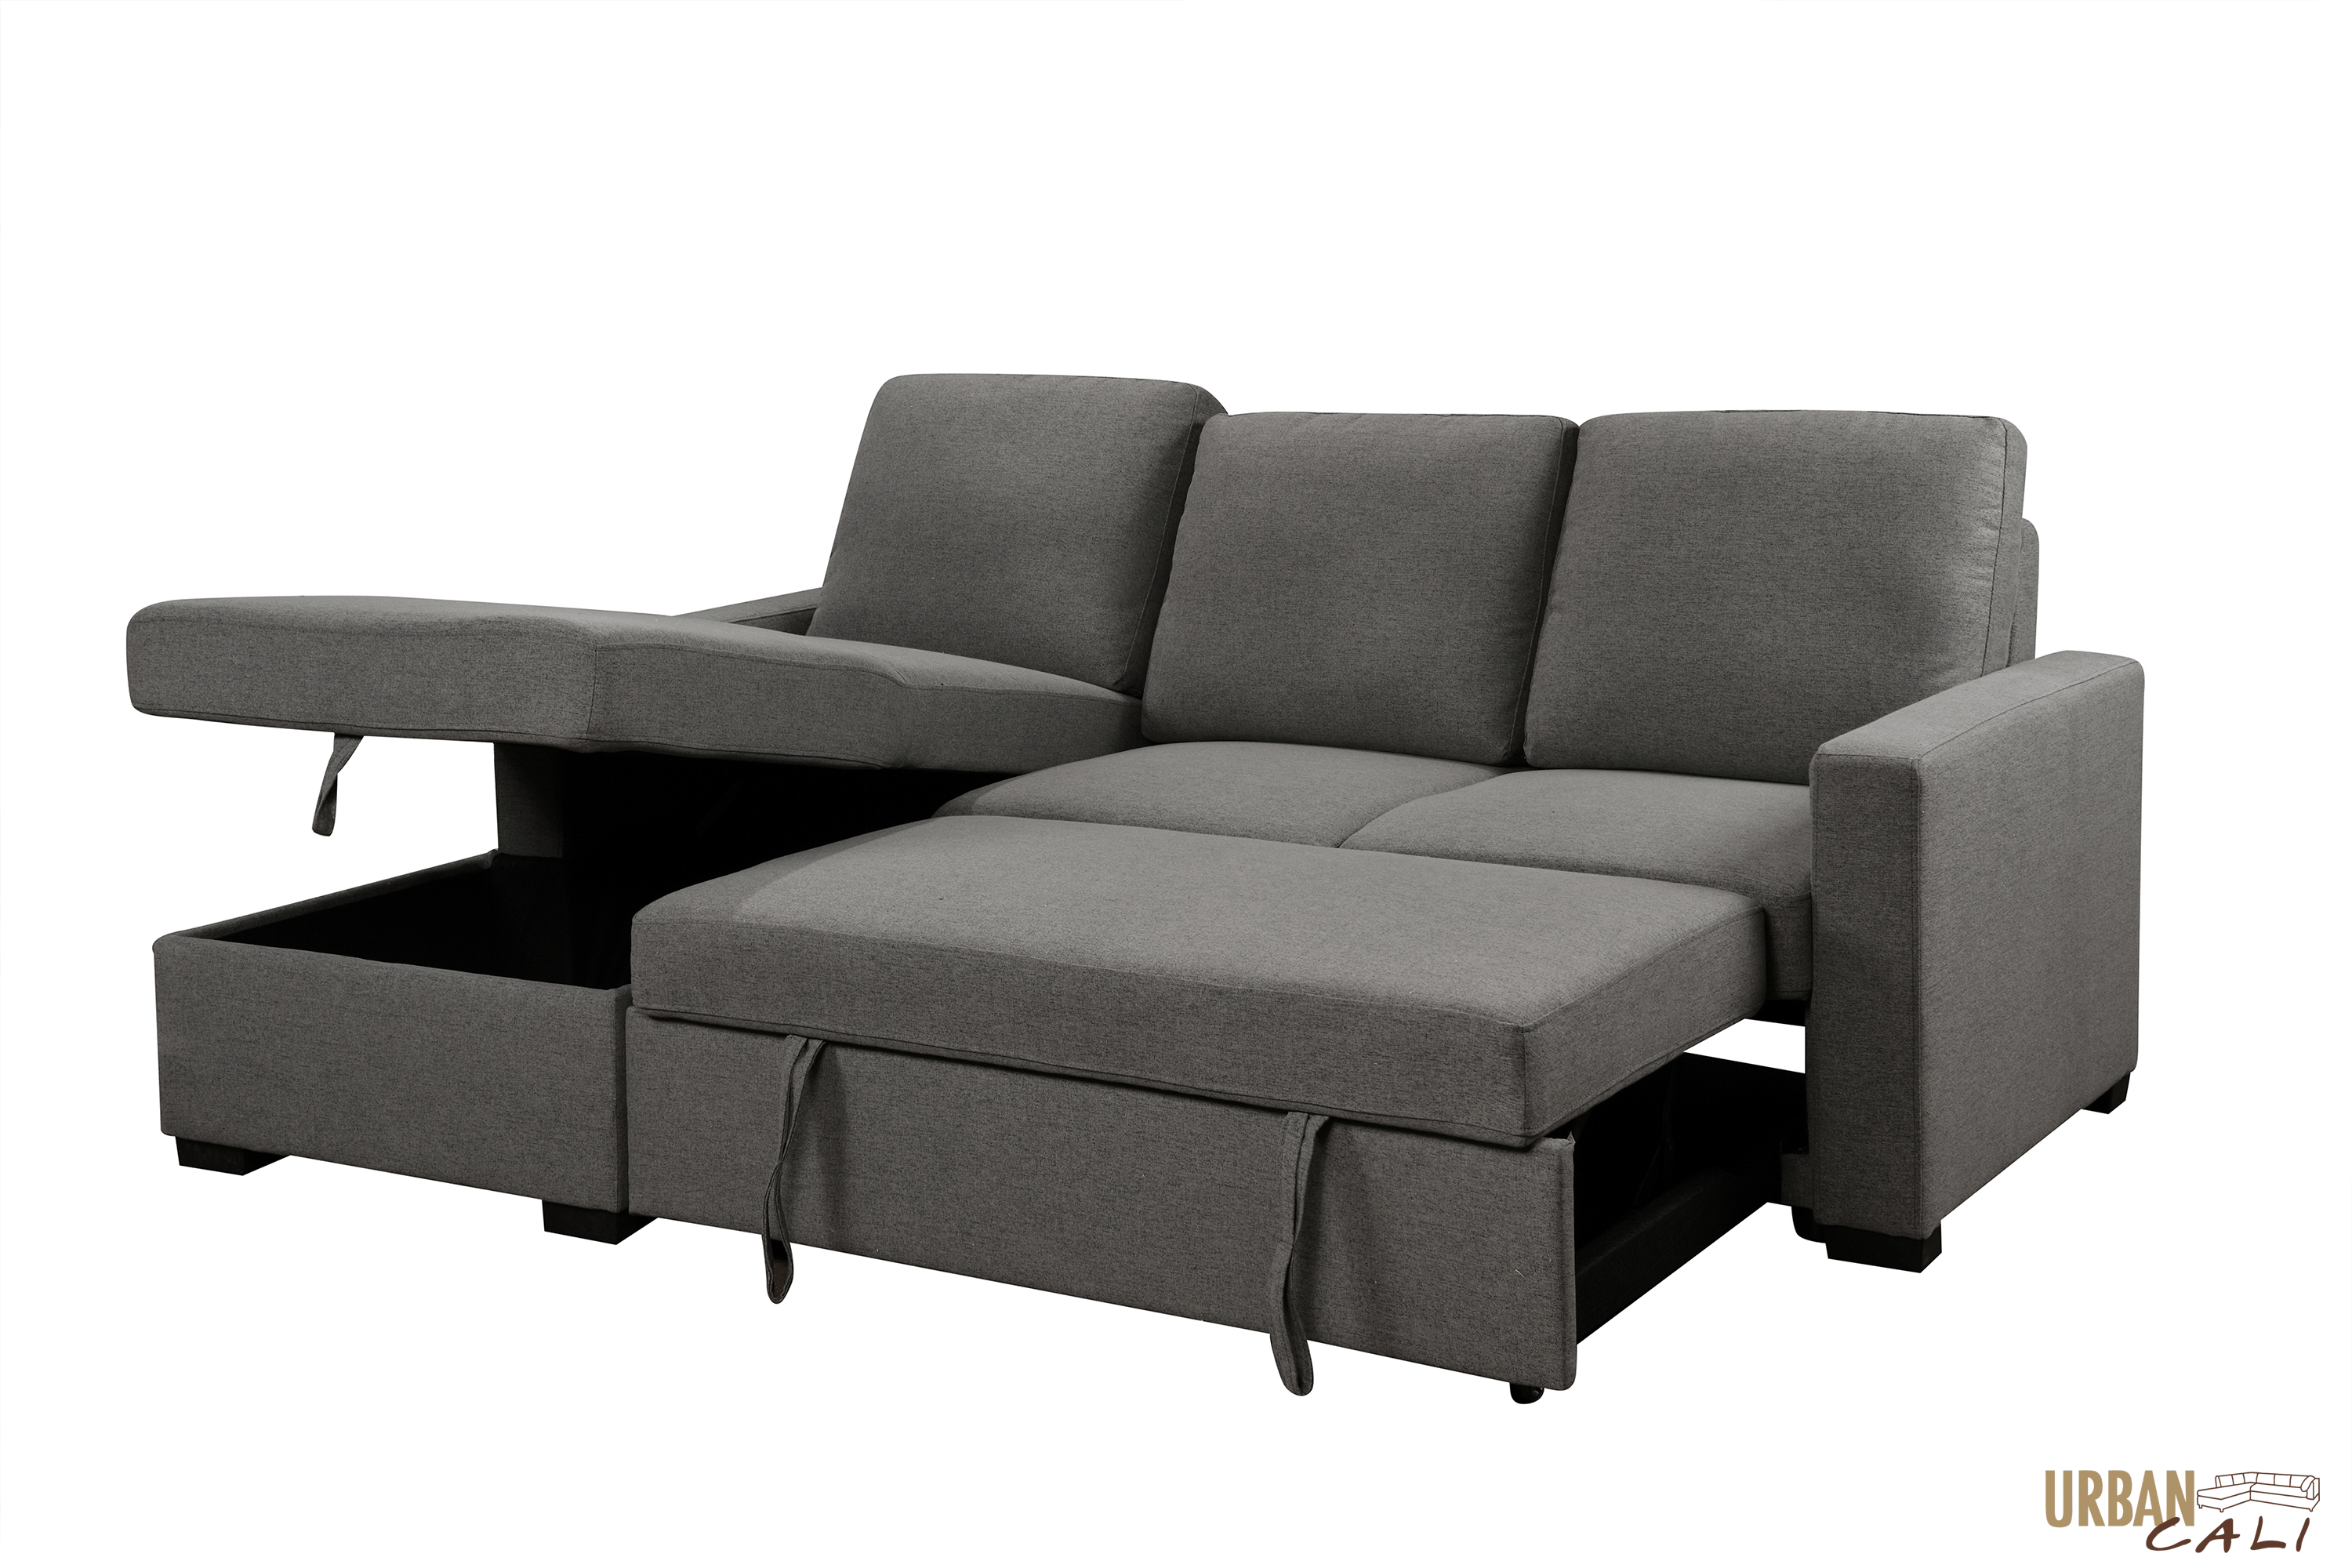 Pending - Urban Cali Sausalito Sleeper Sectional Sofa Bed with Storage Chaise in Solis Dark Grey